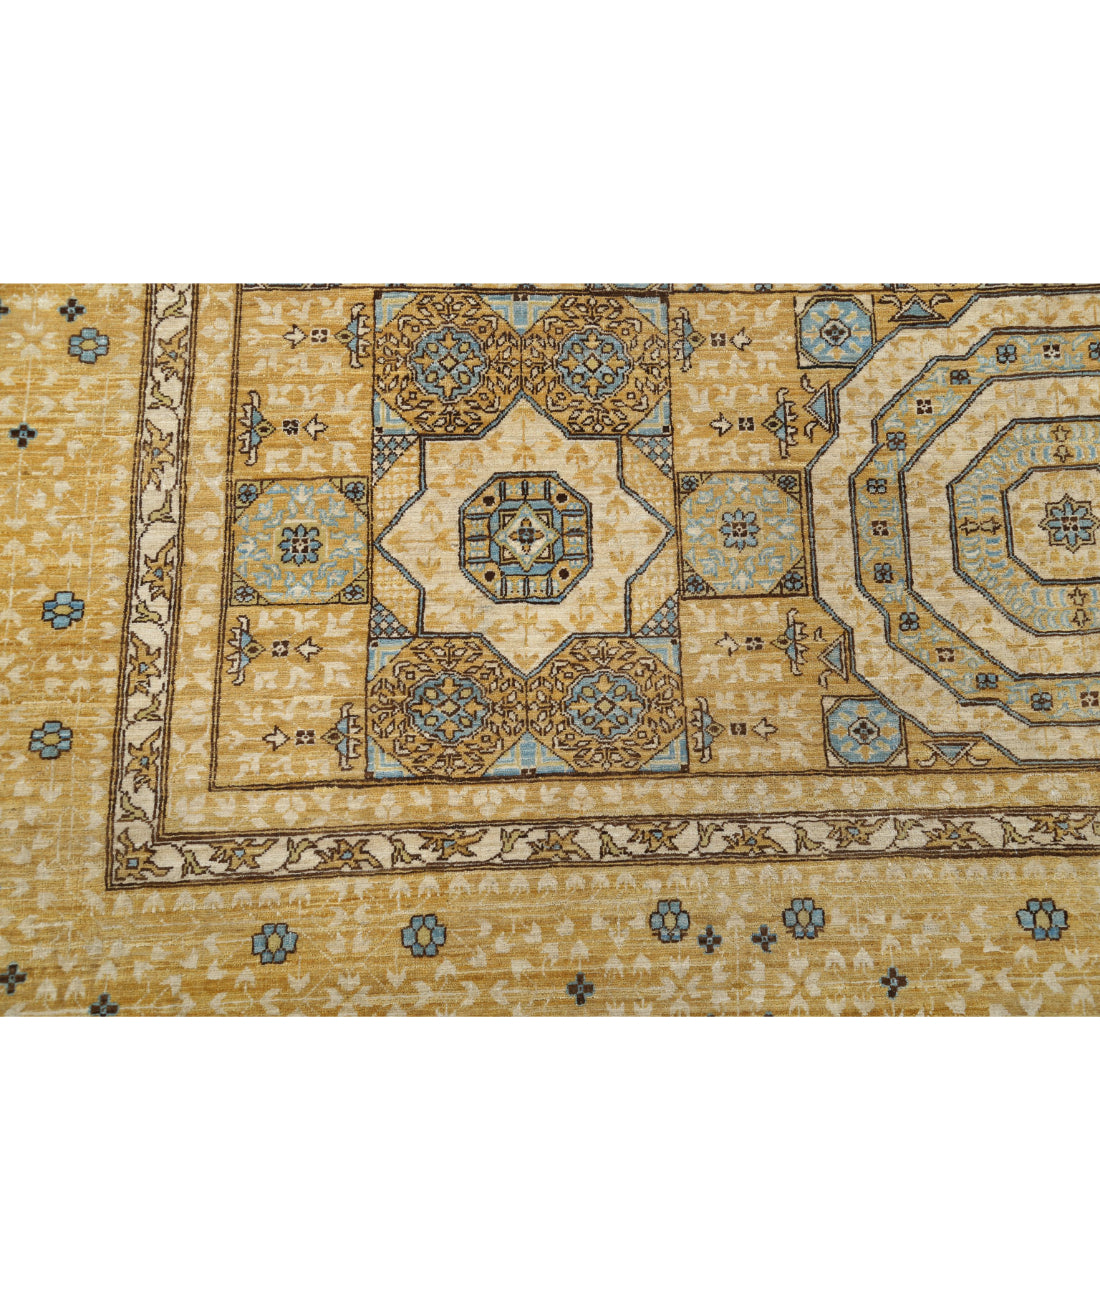 Hand Knotted Fine Mamluk Wool Rug - 7'10'' x 10'10'' 7'10'' x 10'10'' (235 X 325) / Gold / Ivory